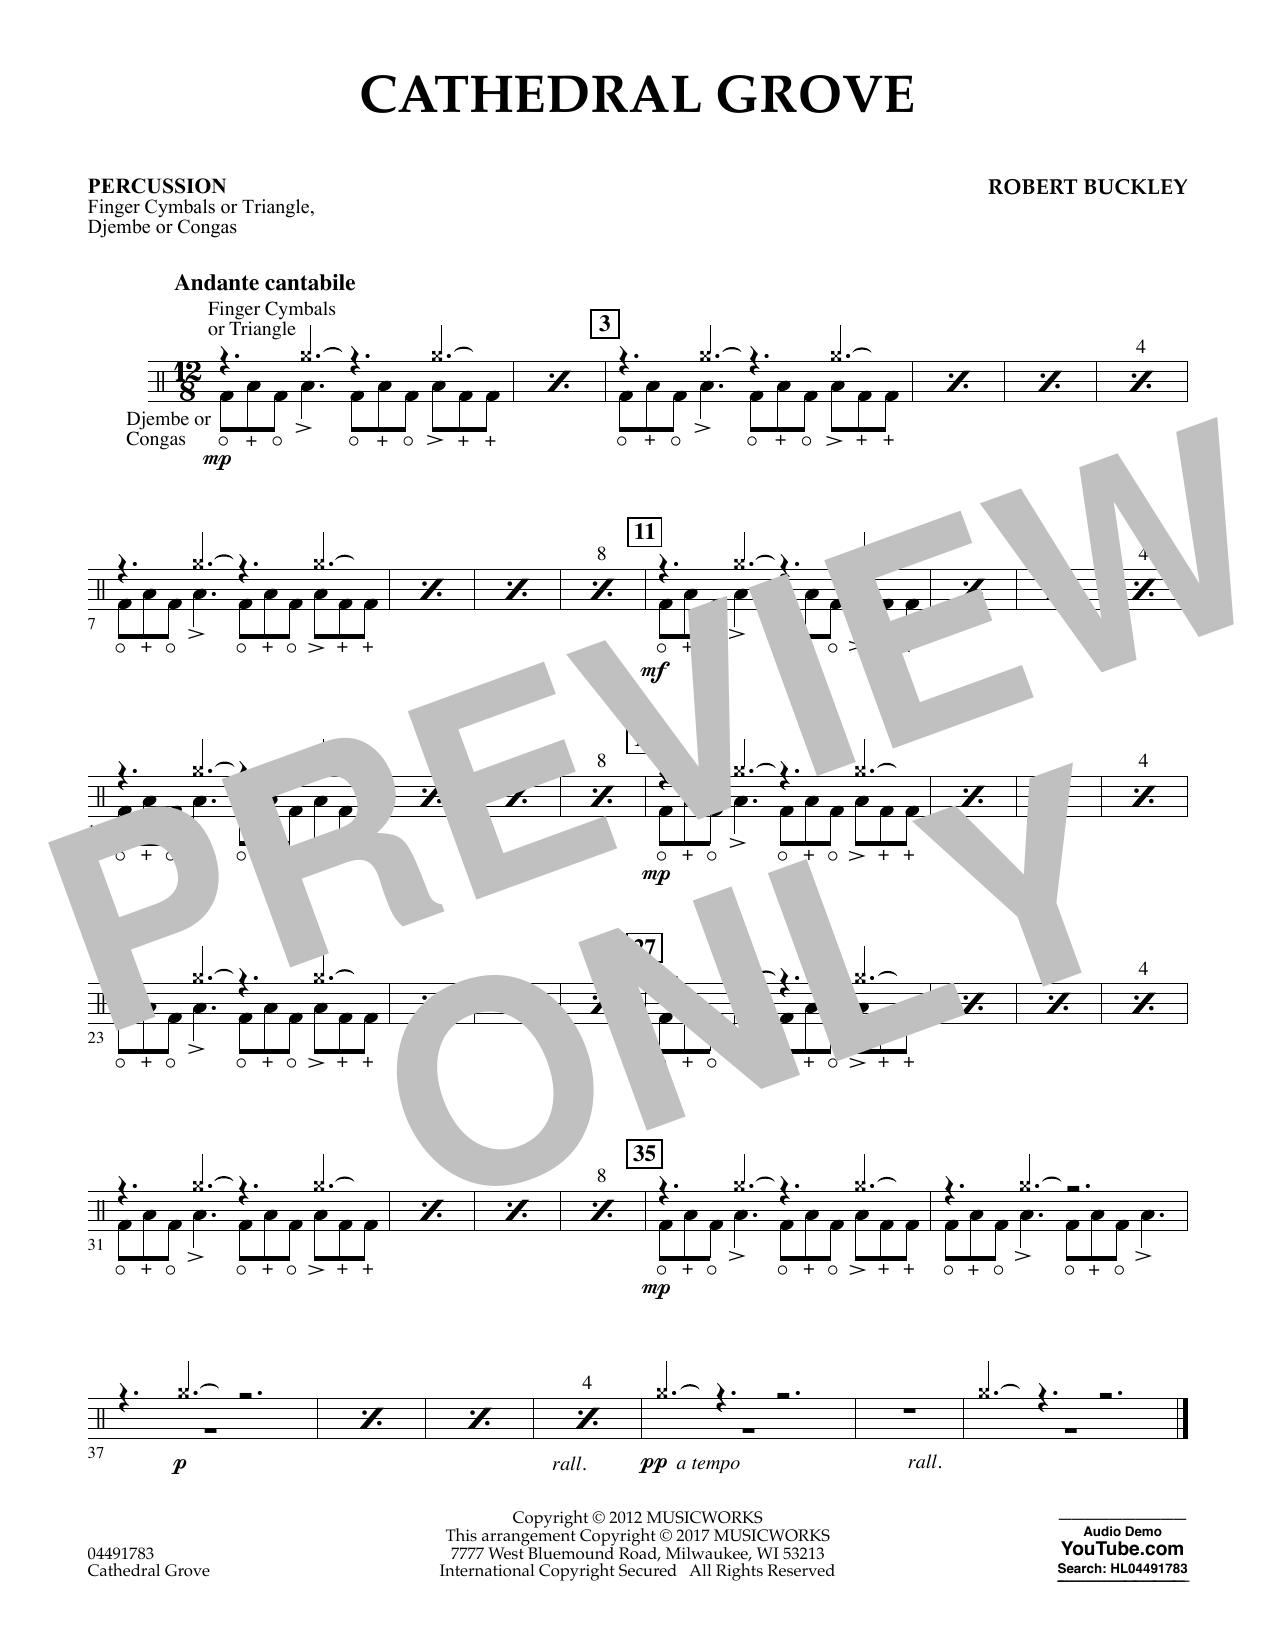 Download Robert Buckley Cathedral Grove - Percussion Sheet Music